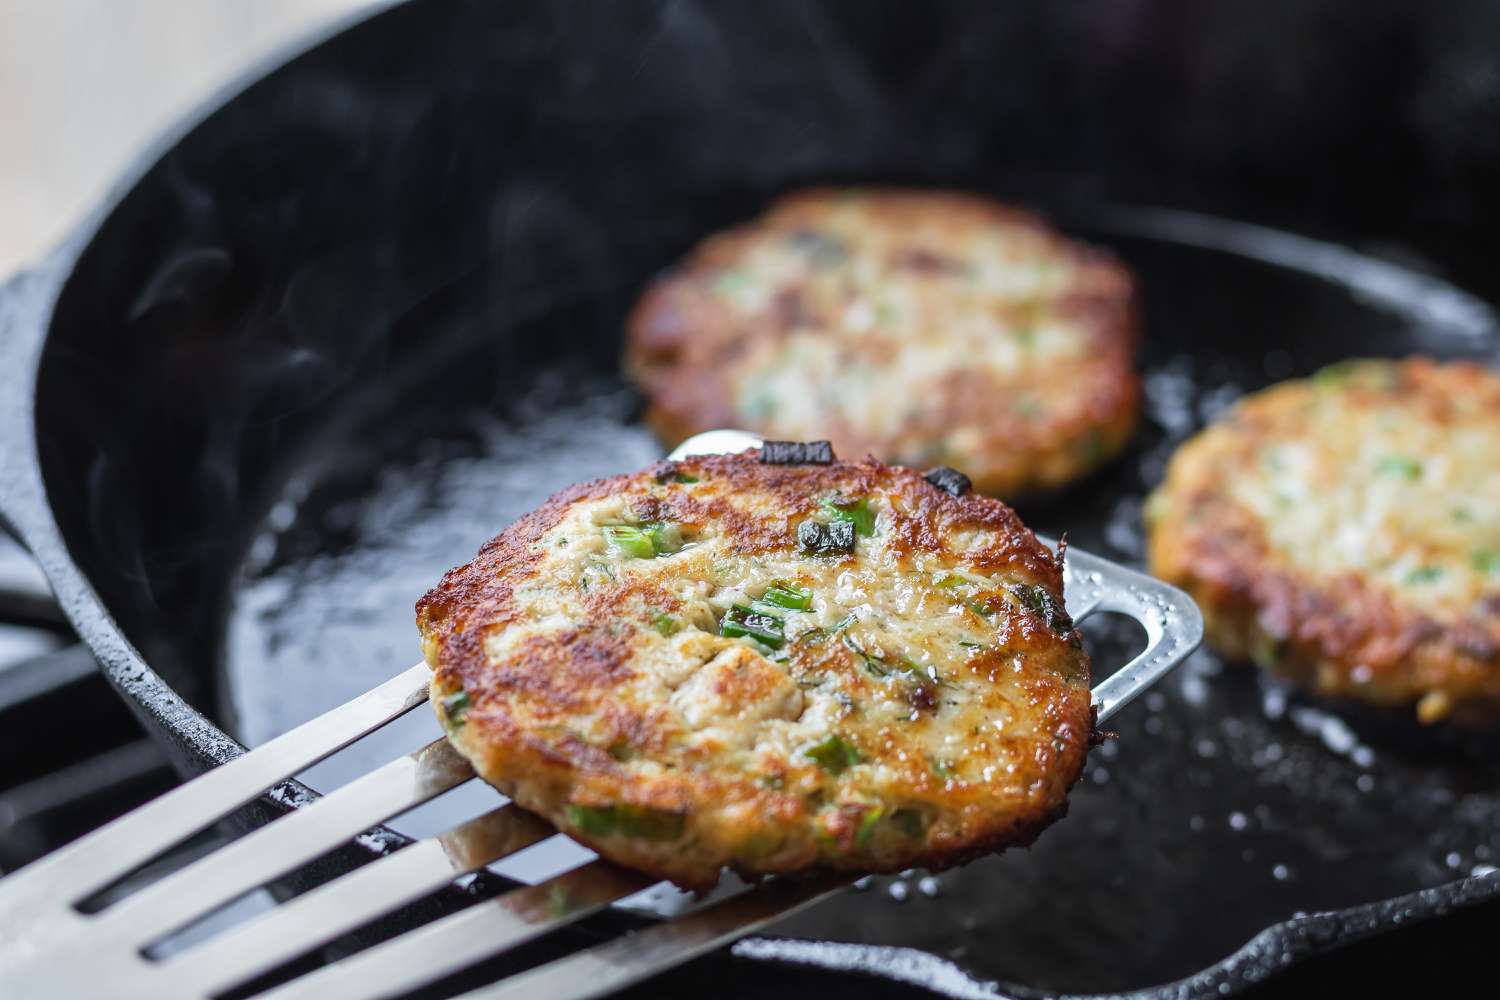 How To Cook Salmon Patties On The Stove? - Recipes.net